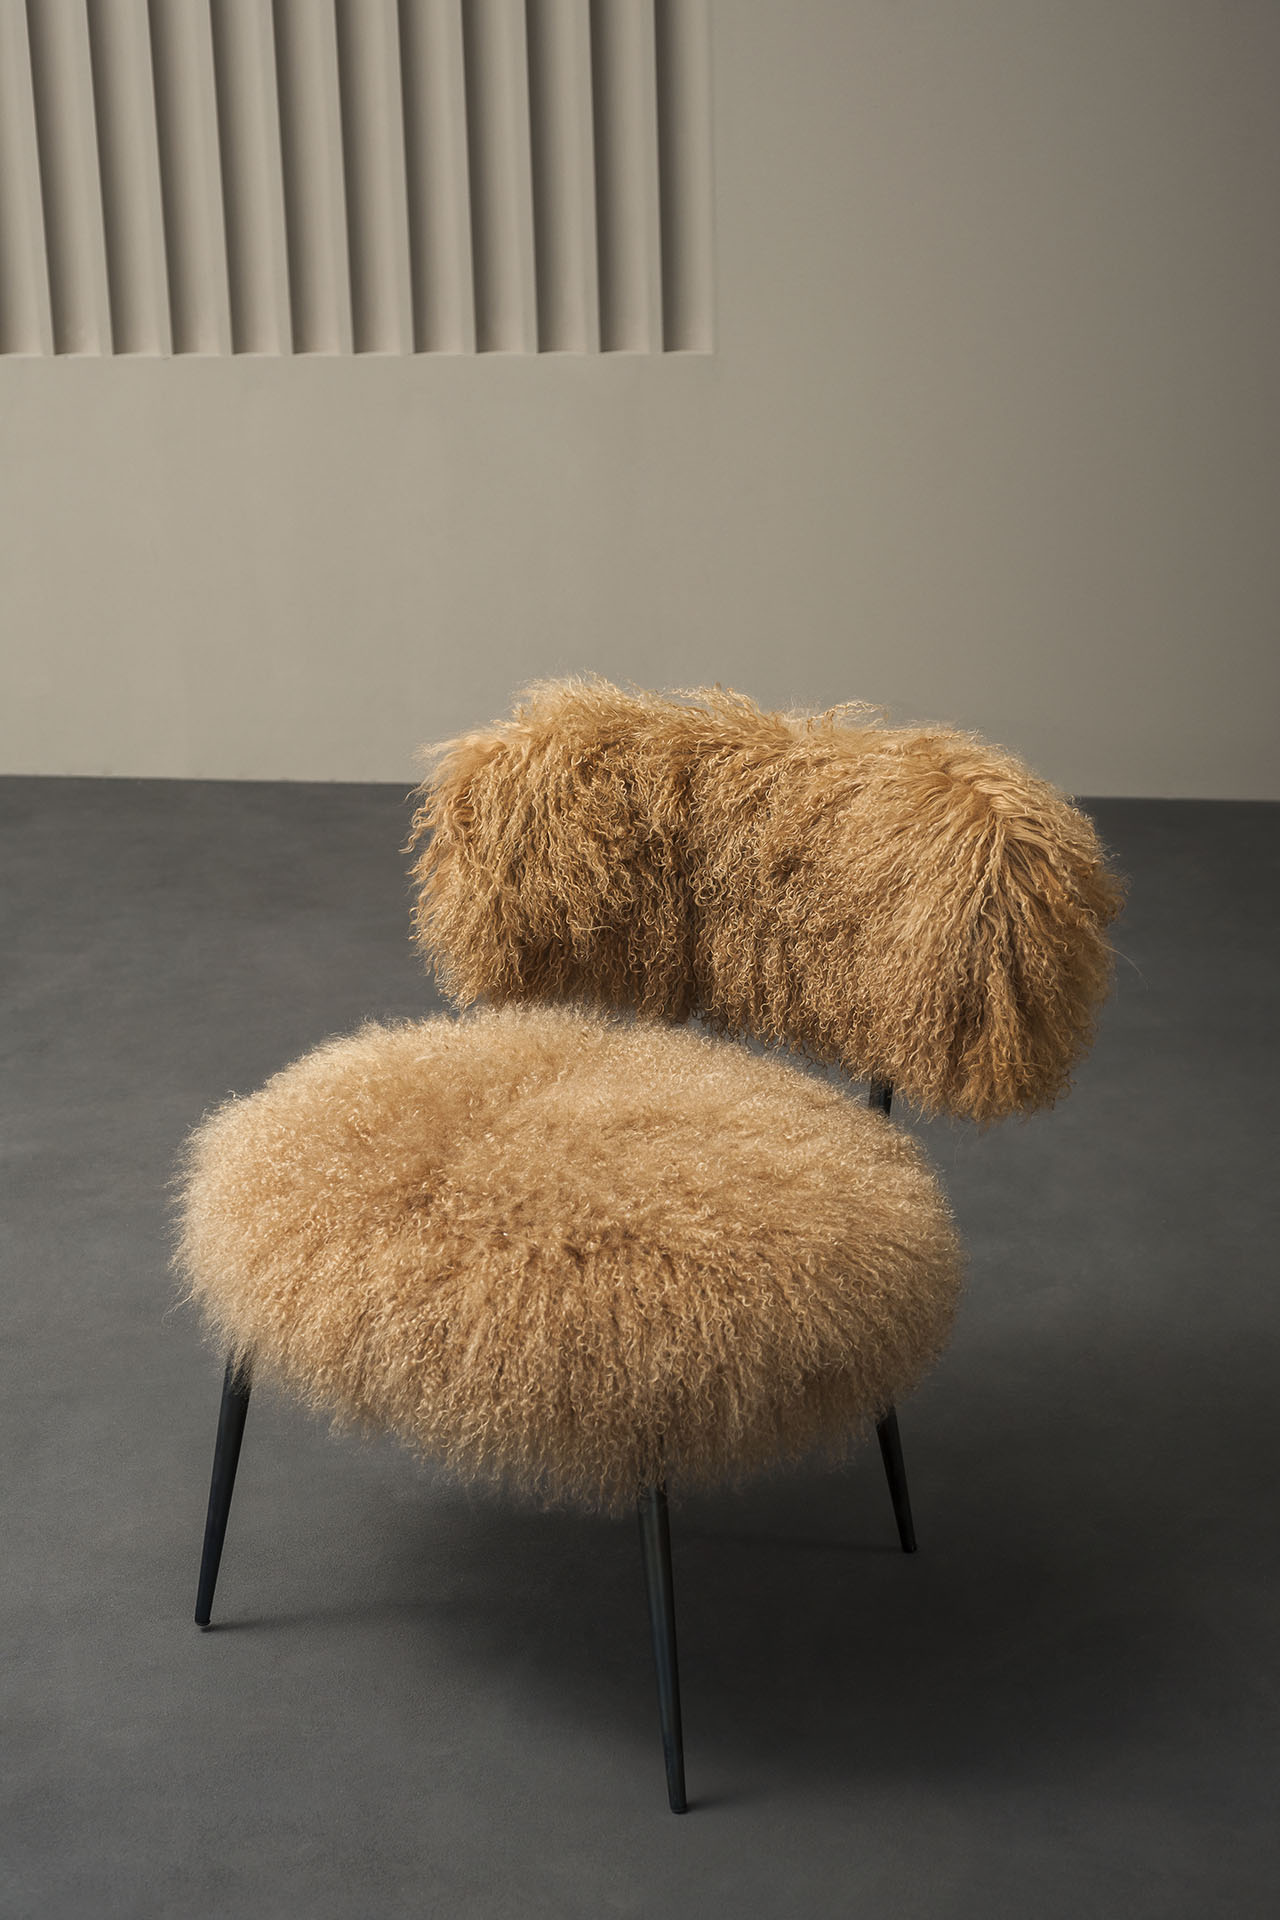 The Nepal chair was designed by Paola Navone and is upholstered in Mongolian sheepskin. Photo c/o Baxter. 